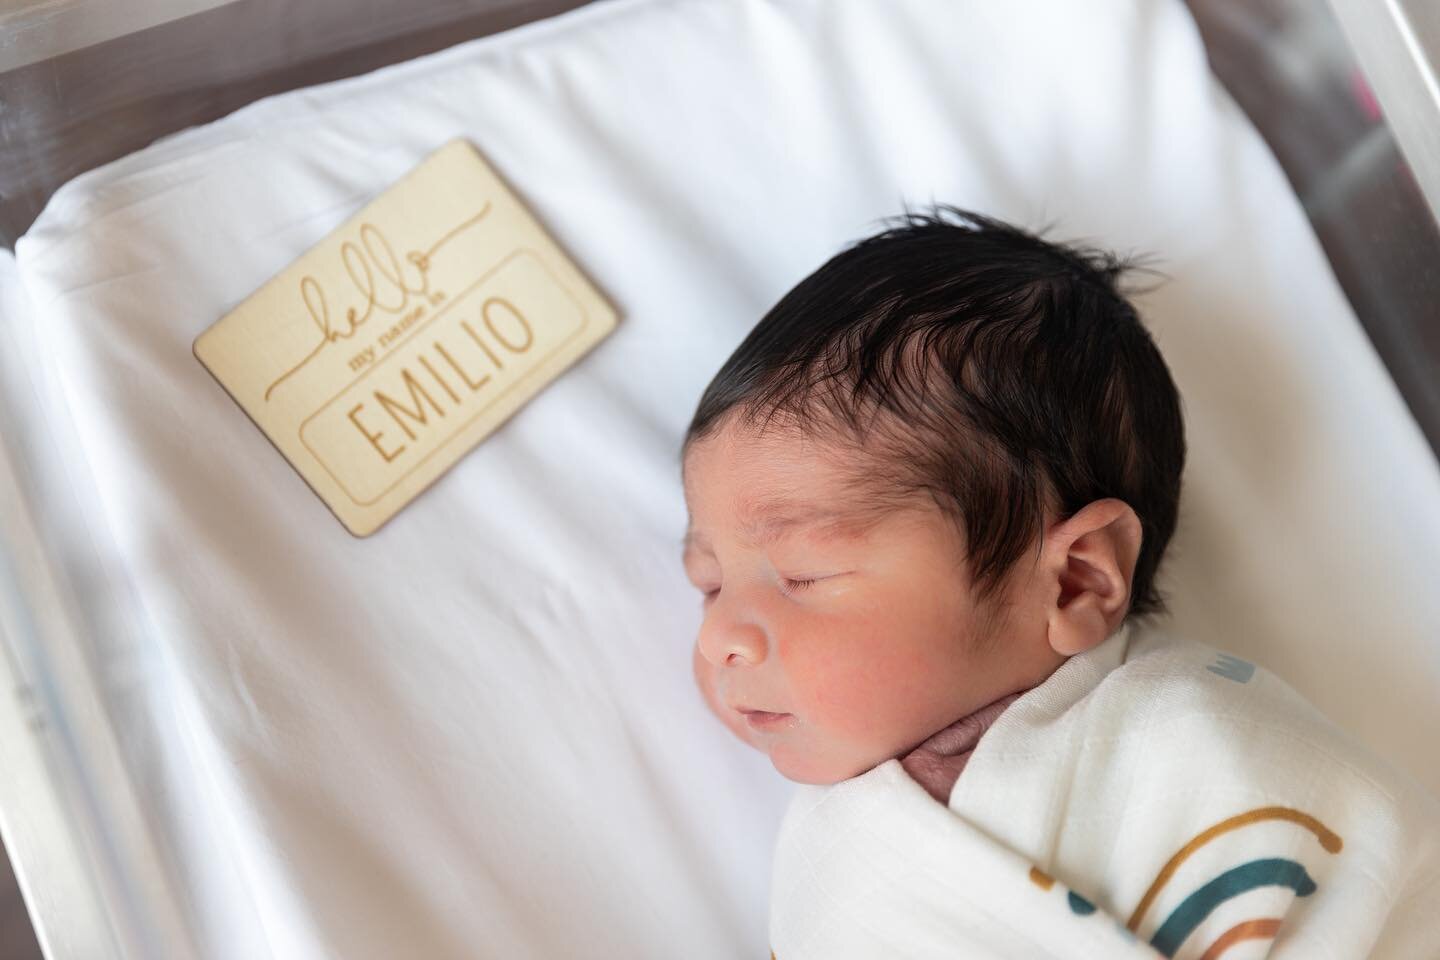 Sweet little Emilio!! 🥹 His amazing mama booked a Fresh 48 Package with me - this package includes:

✨ Fresh 48 Photography - 10 Edited Images
✨ Placenta Encapsulation
✨ Placenta Tincture
✨ Cord Keepsake

All for just $350! Book with me today! 🥰